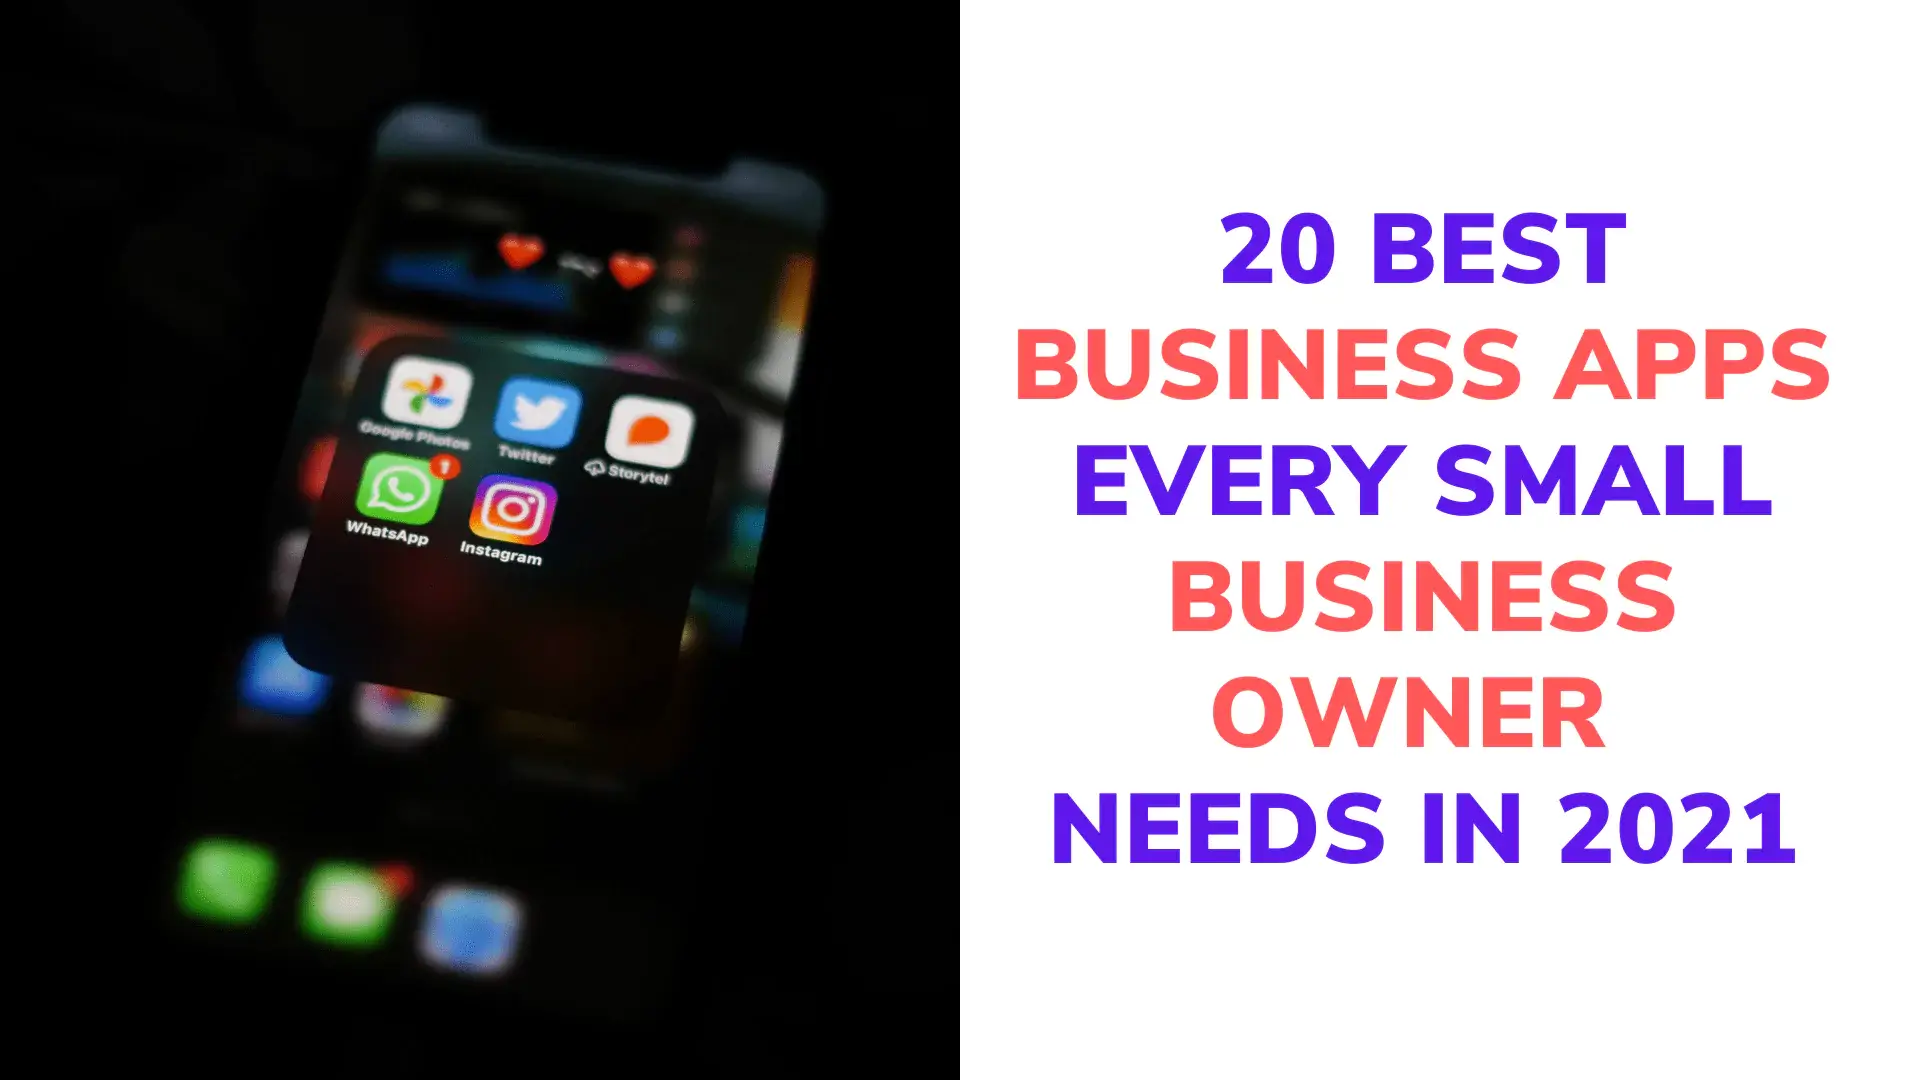 20-best-business-apps-every-small-business-owner-needs-in-2021